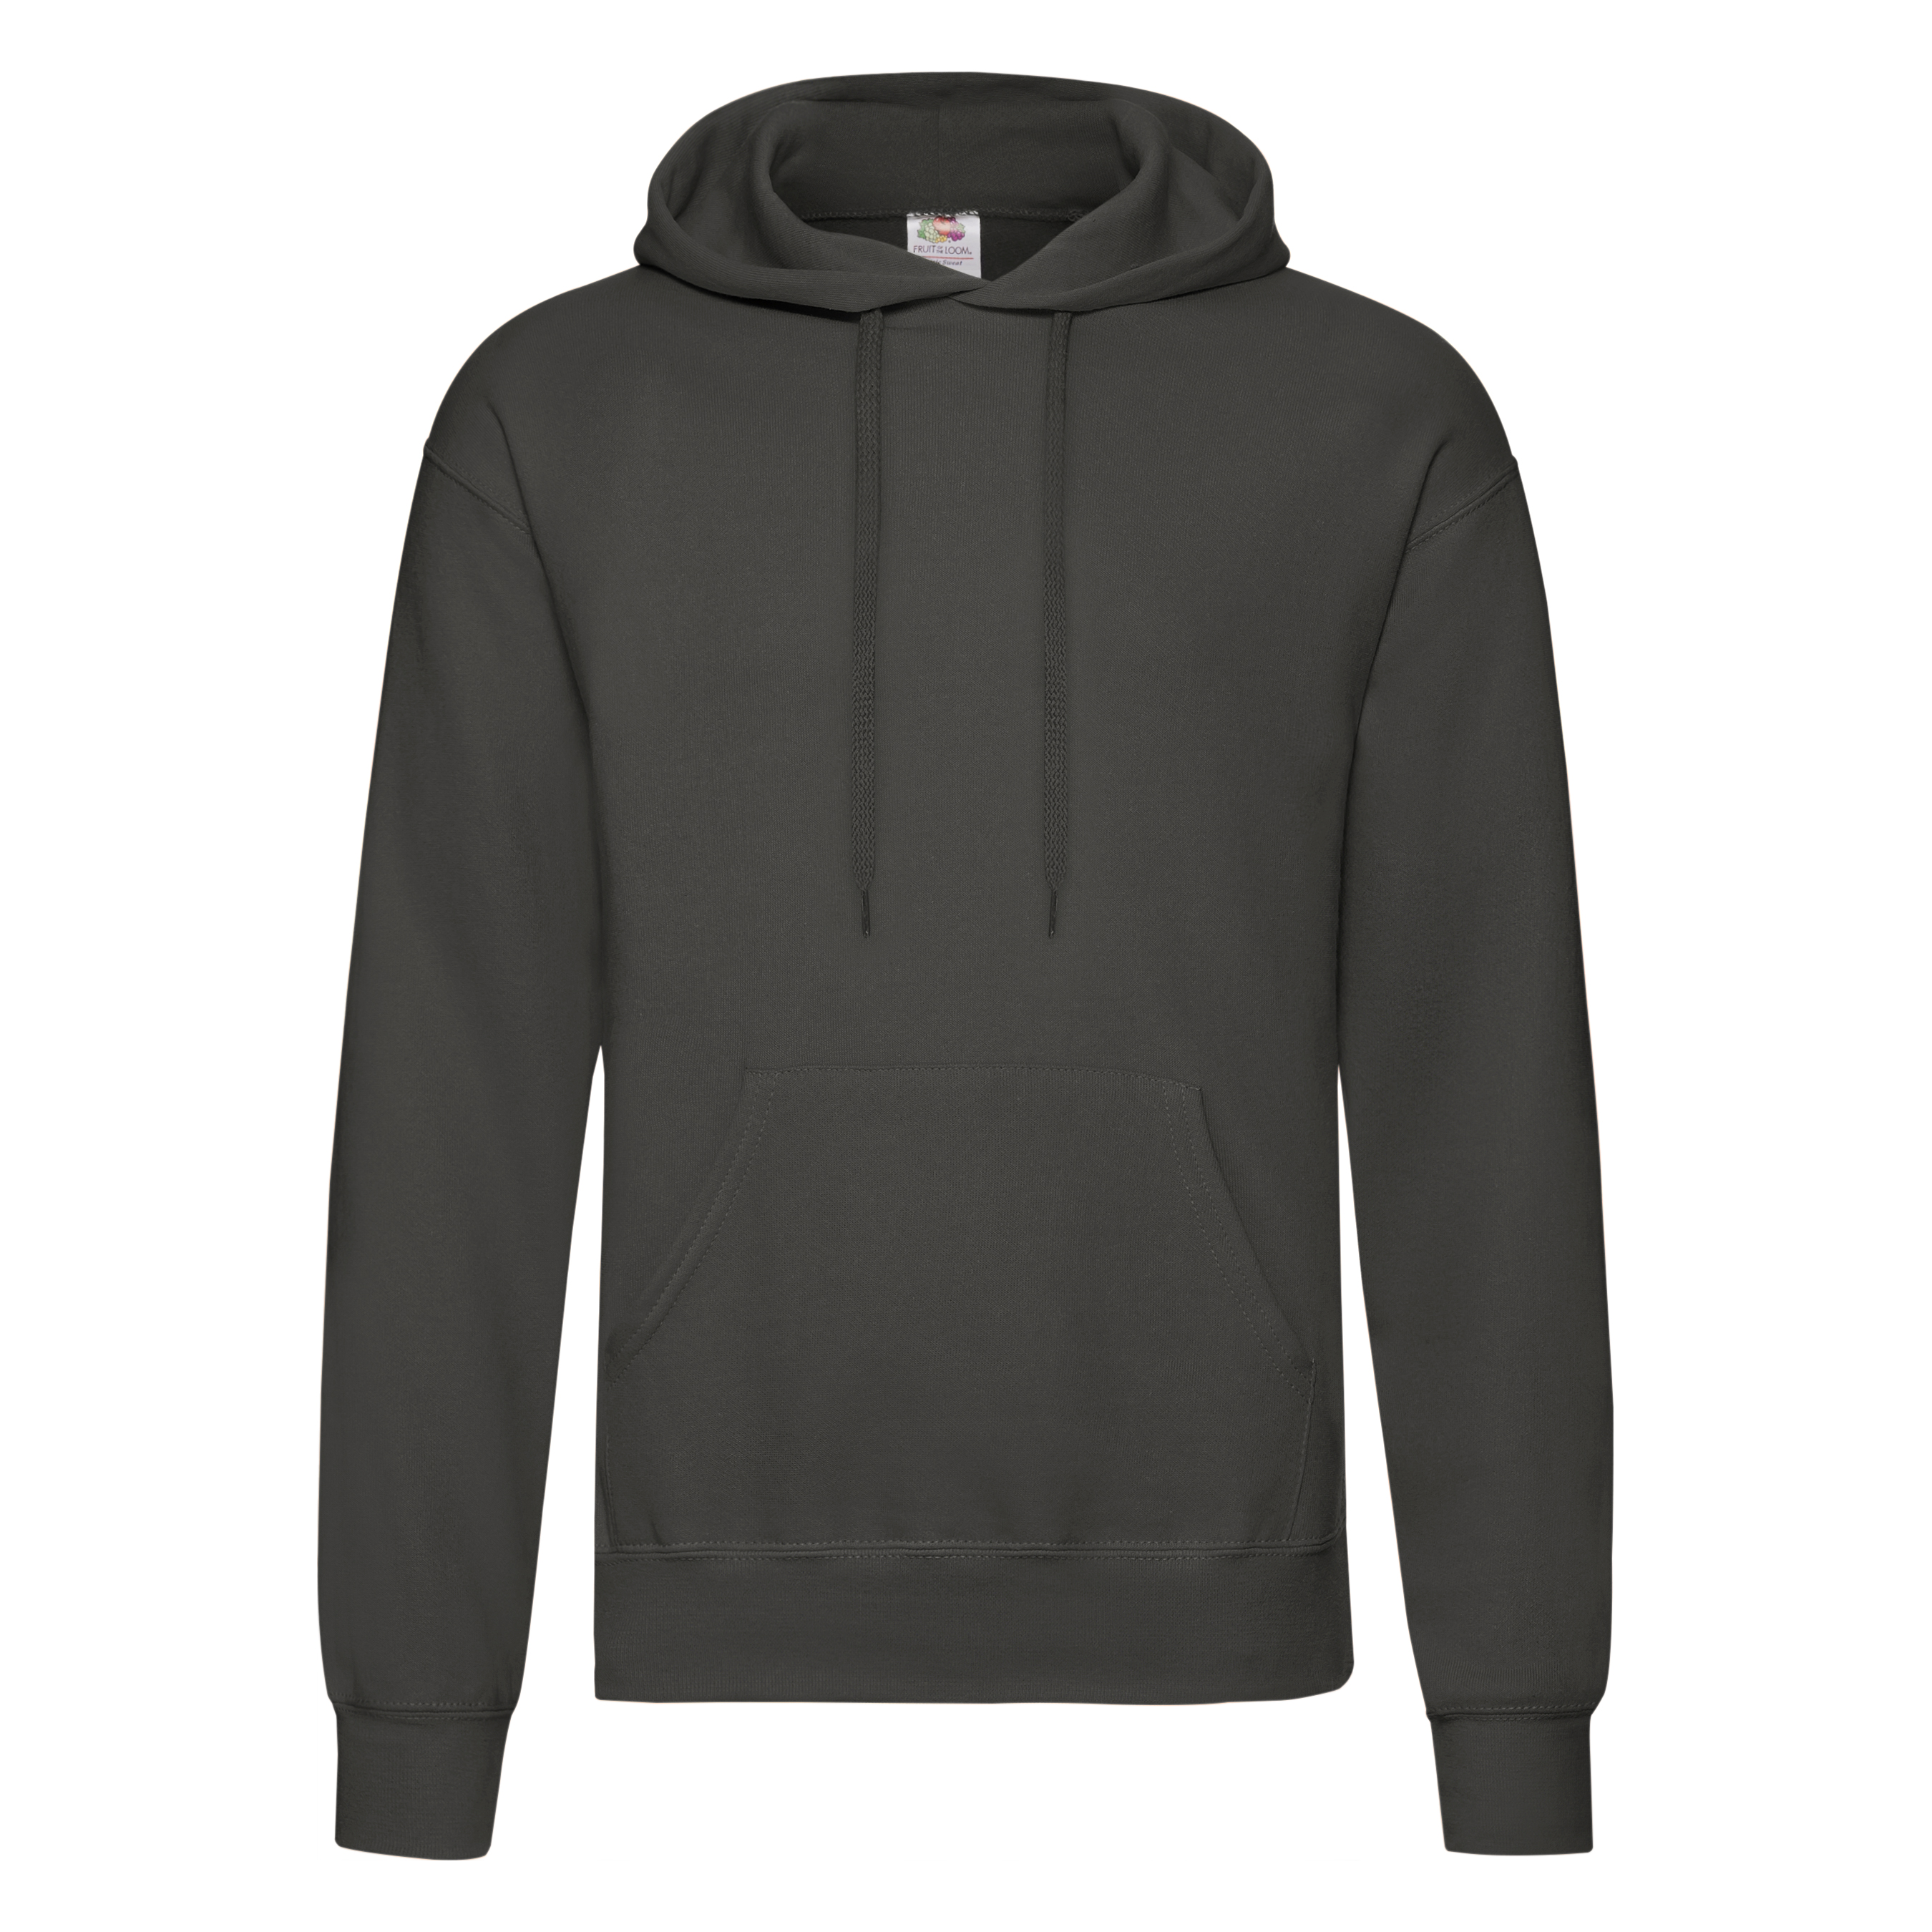 ax-httpswebsystems.s3.amazonaws.comtmp_for_downloadfruit-of-the-loom-classic-80-20-hooded-sweatshirt-light-graphite.jpeg